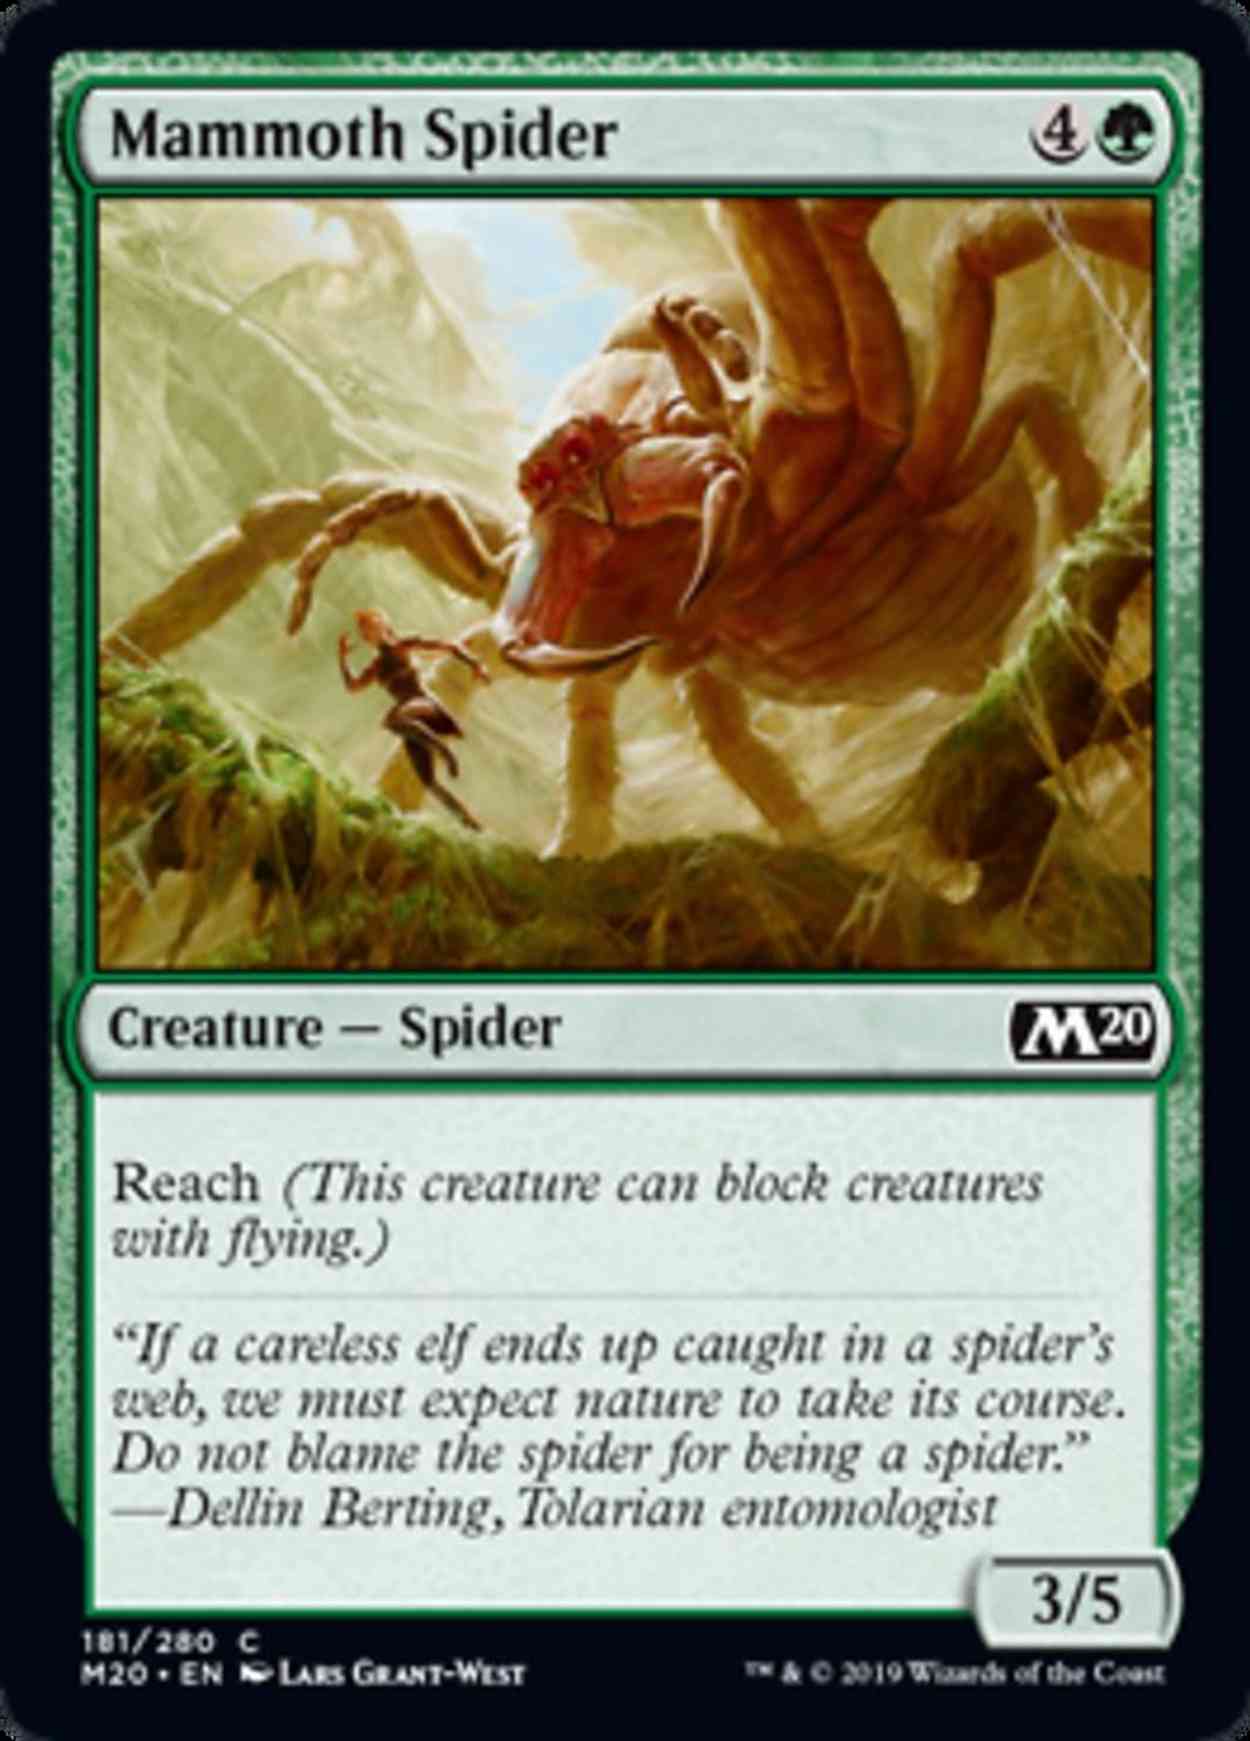 Mammoth Spider magic card front